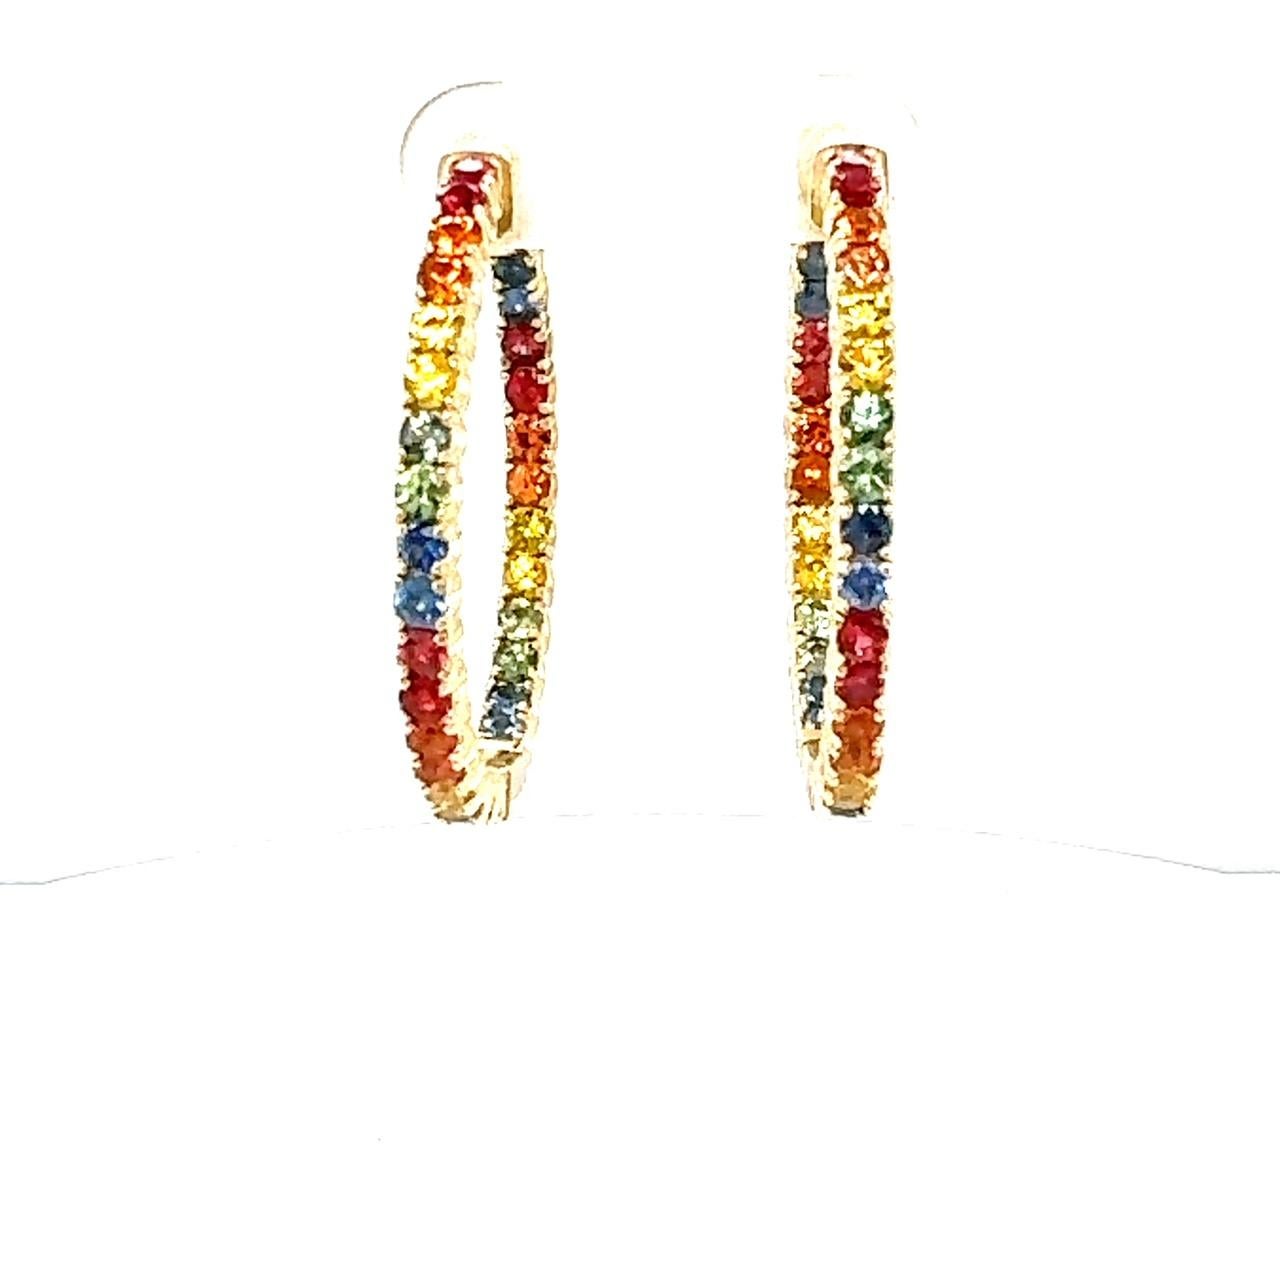 4.12 Carat Rainbow Sapphire Yellow Gold Hoop Earrings
Beautiful Statement Earrings 

Item Specifics:

60 Round Cut Multi-Colored Natural Sapphires weighing 4.12 carats
Total Carat Weight is 4.12 carats
Crafted in 14K Yellow Gold approximately 6.9